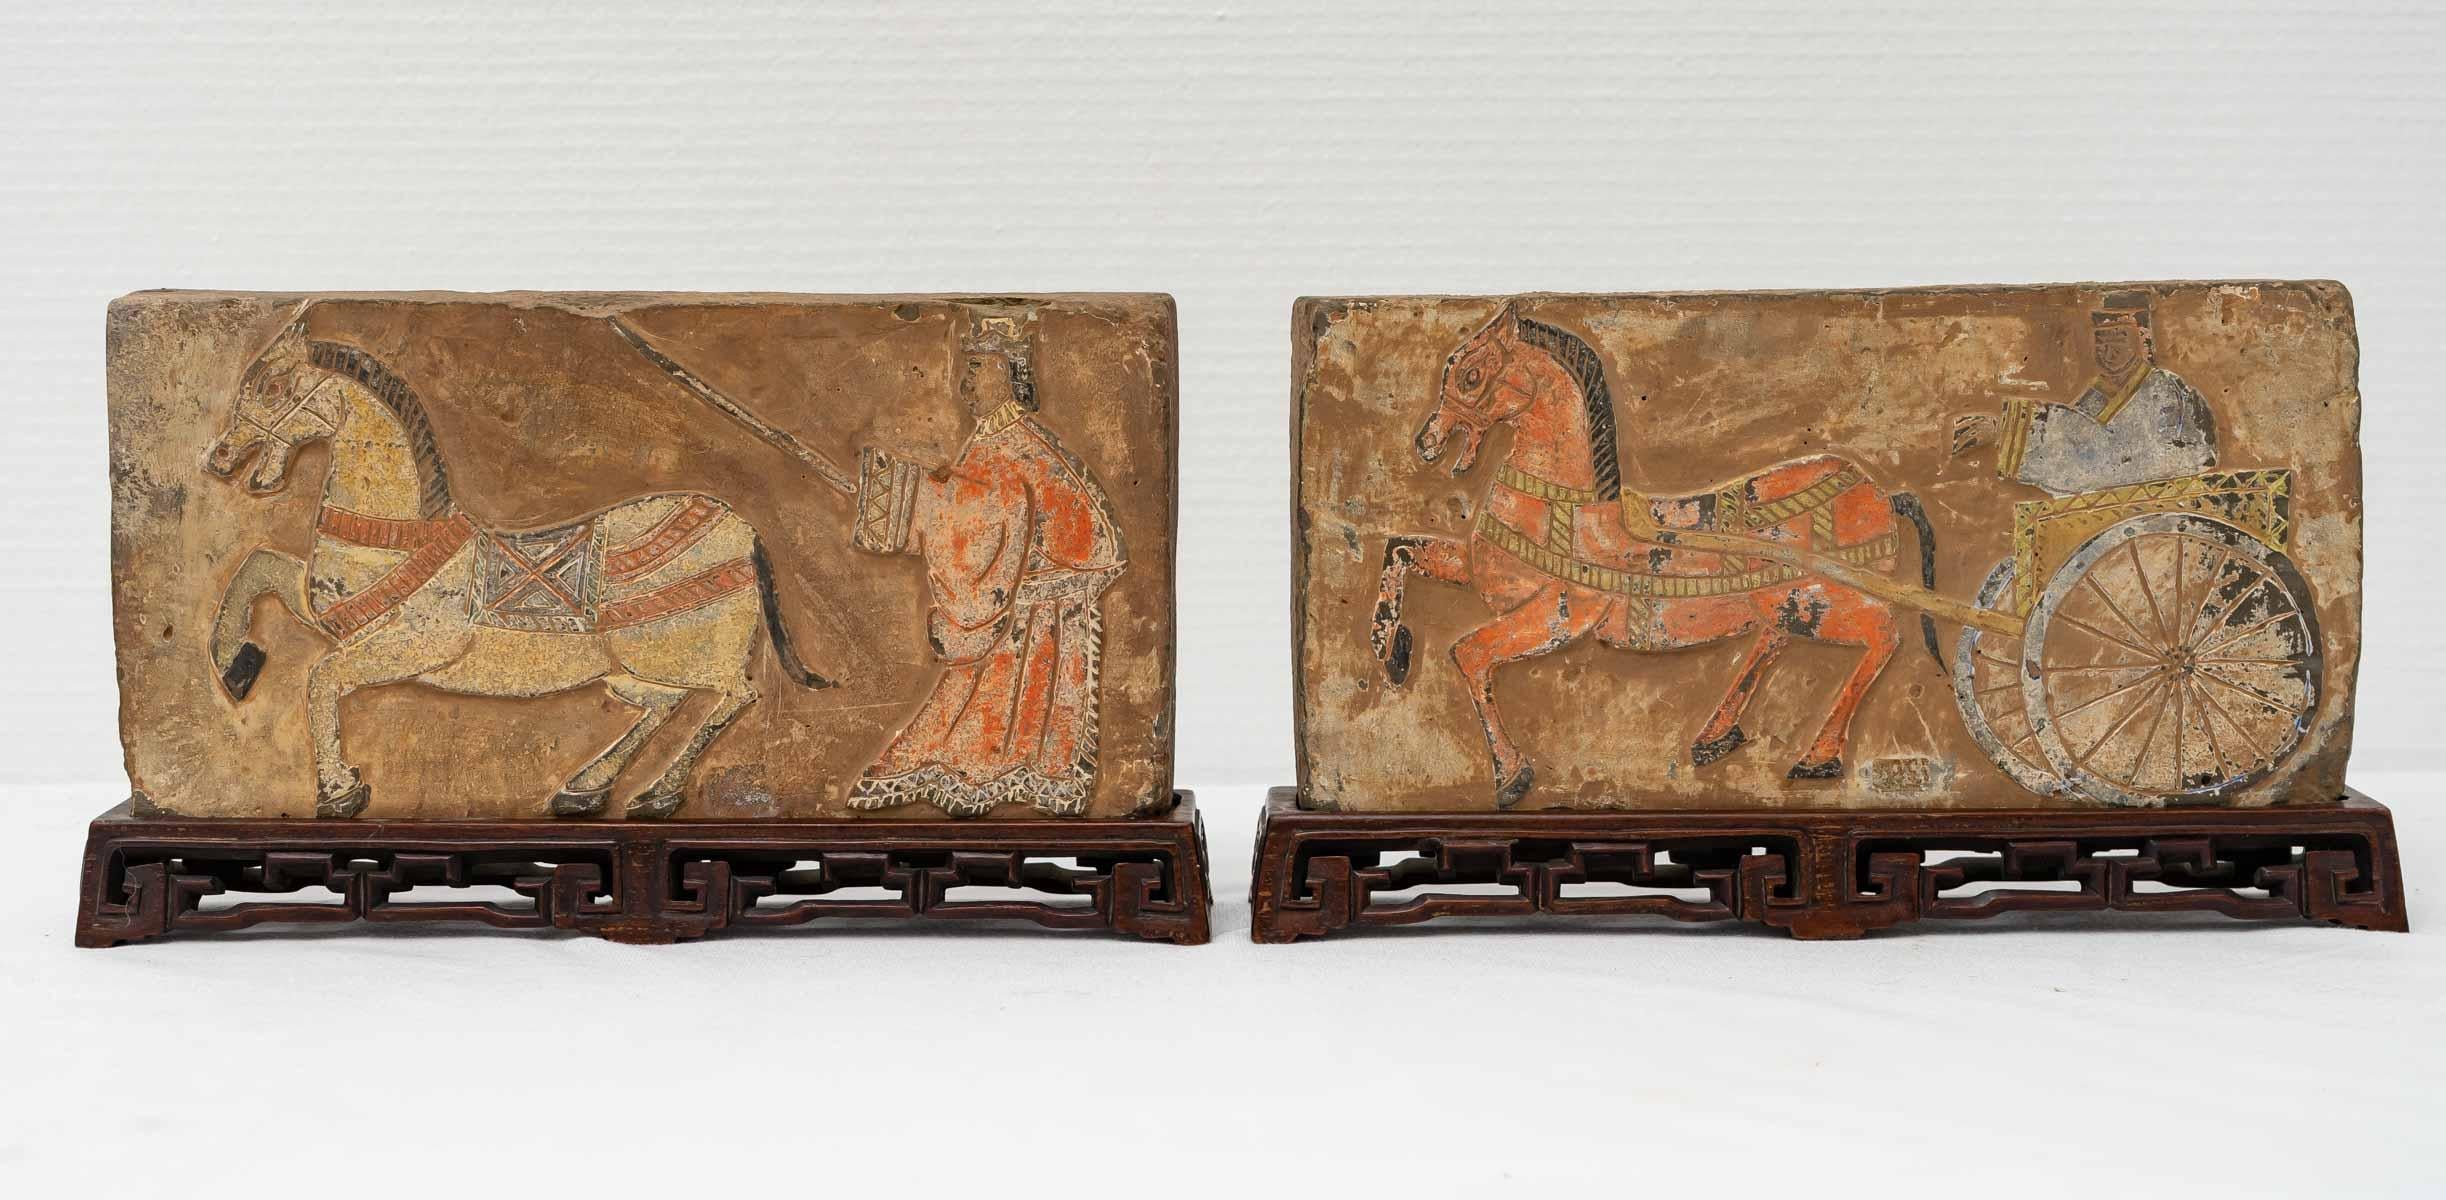 Pair of terracotta bricks with traces of polychromy representing for one a character driving his chariot drawn by a horse and for the other a character training his horse.

These two bricks are exposed on their original carved wooden bases.

Period